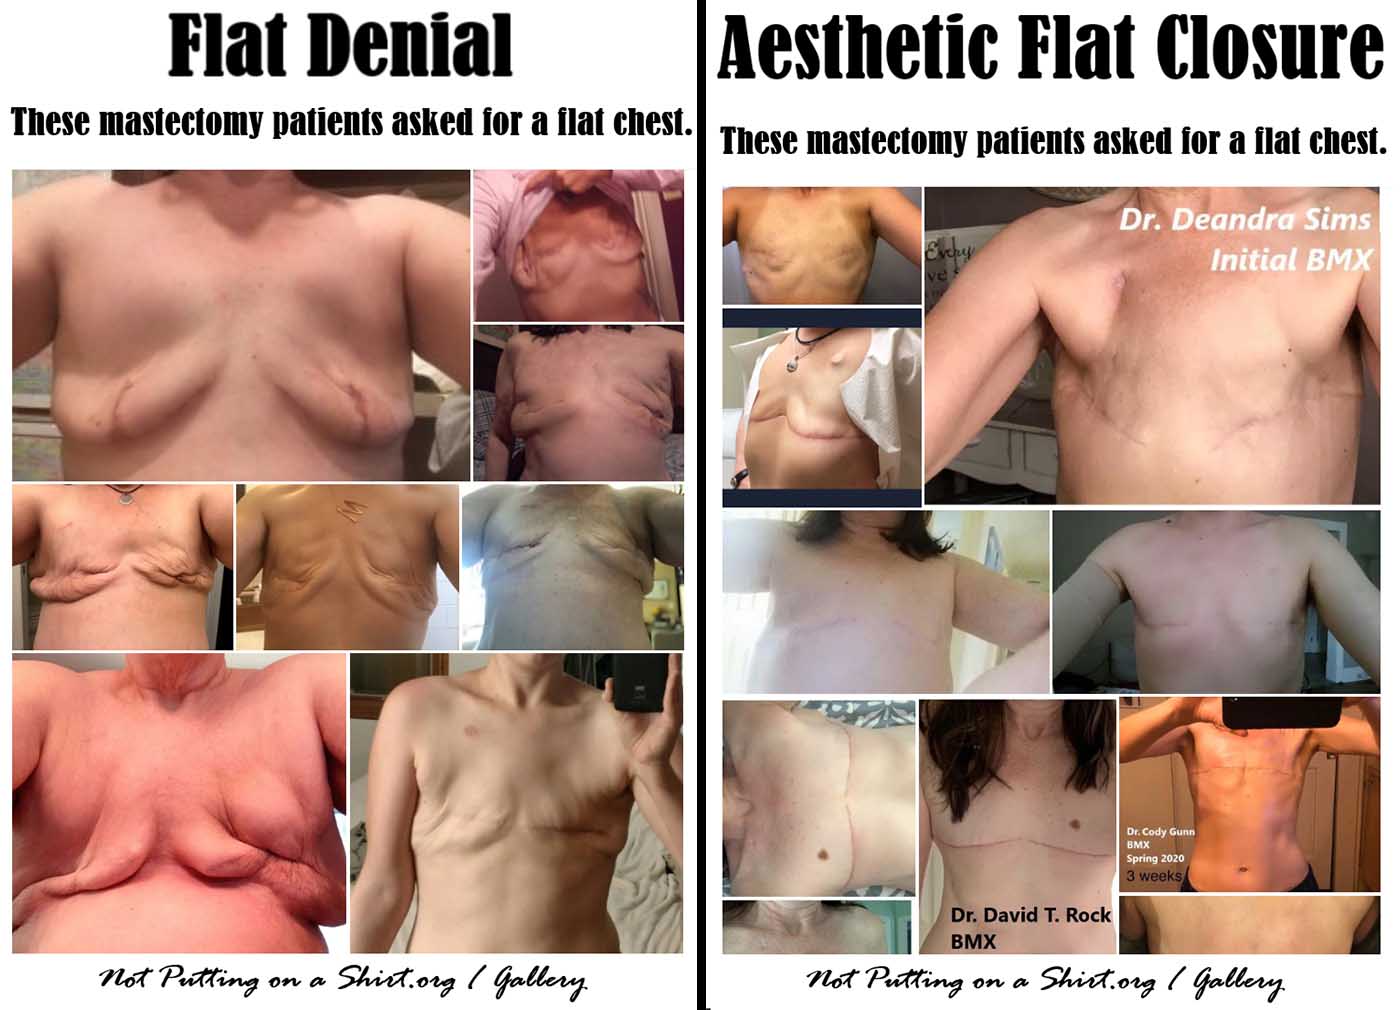 Not Putting on a Shirt - If you're facing mastectomy & considering going  flat, you should know that there are many ways to produce an aesthetic flat  closure (as defined by the